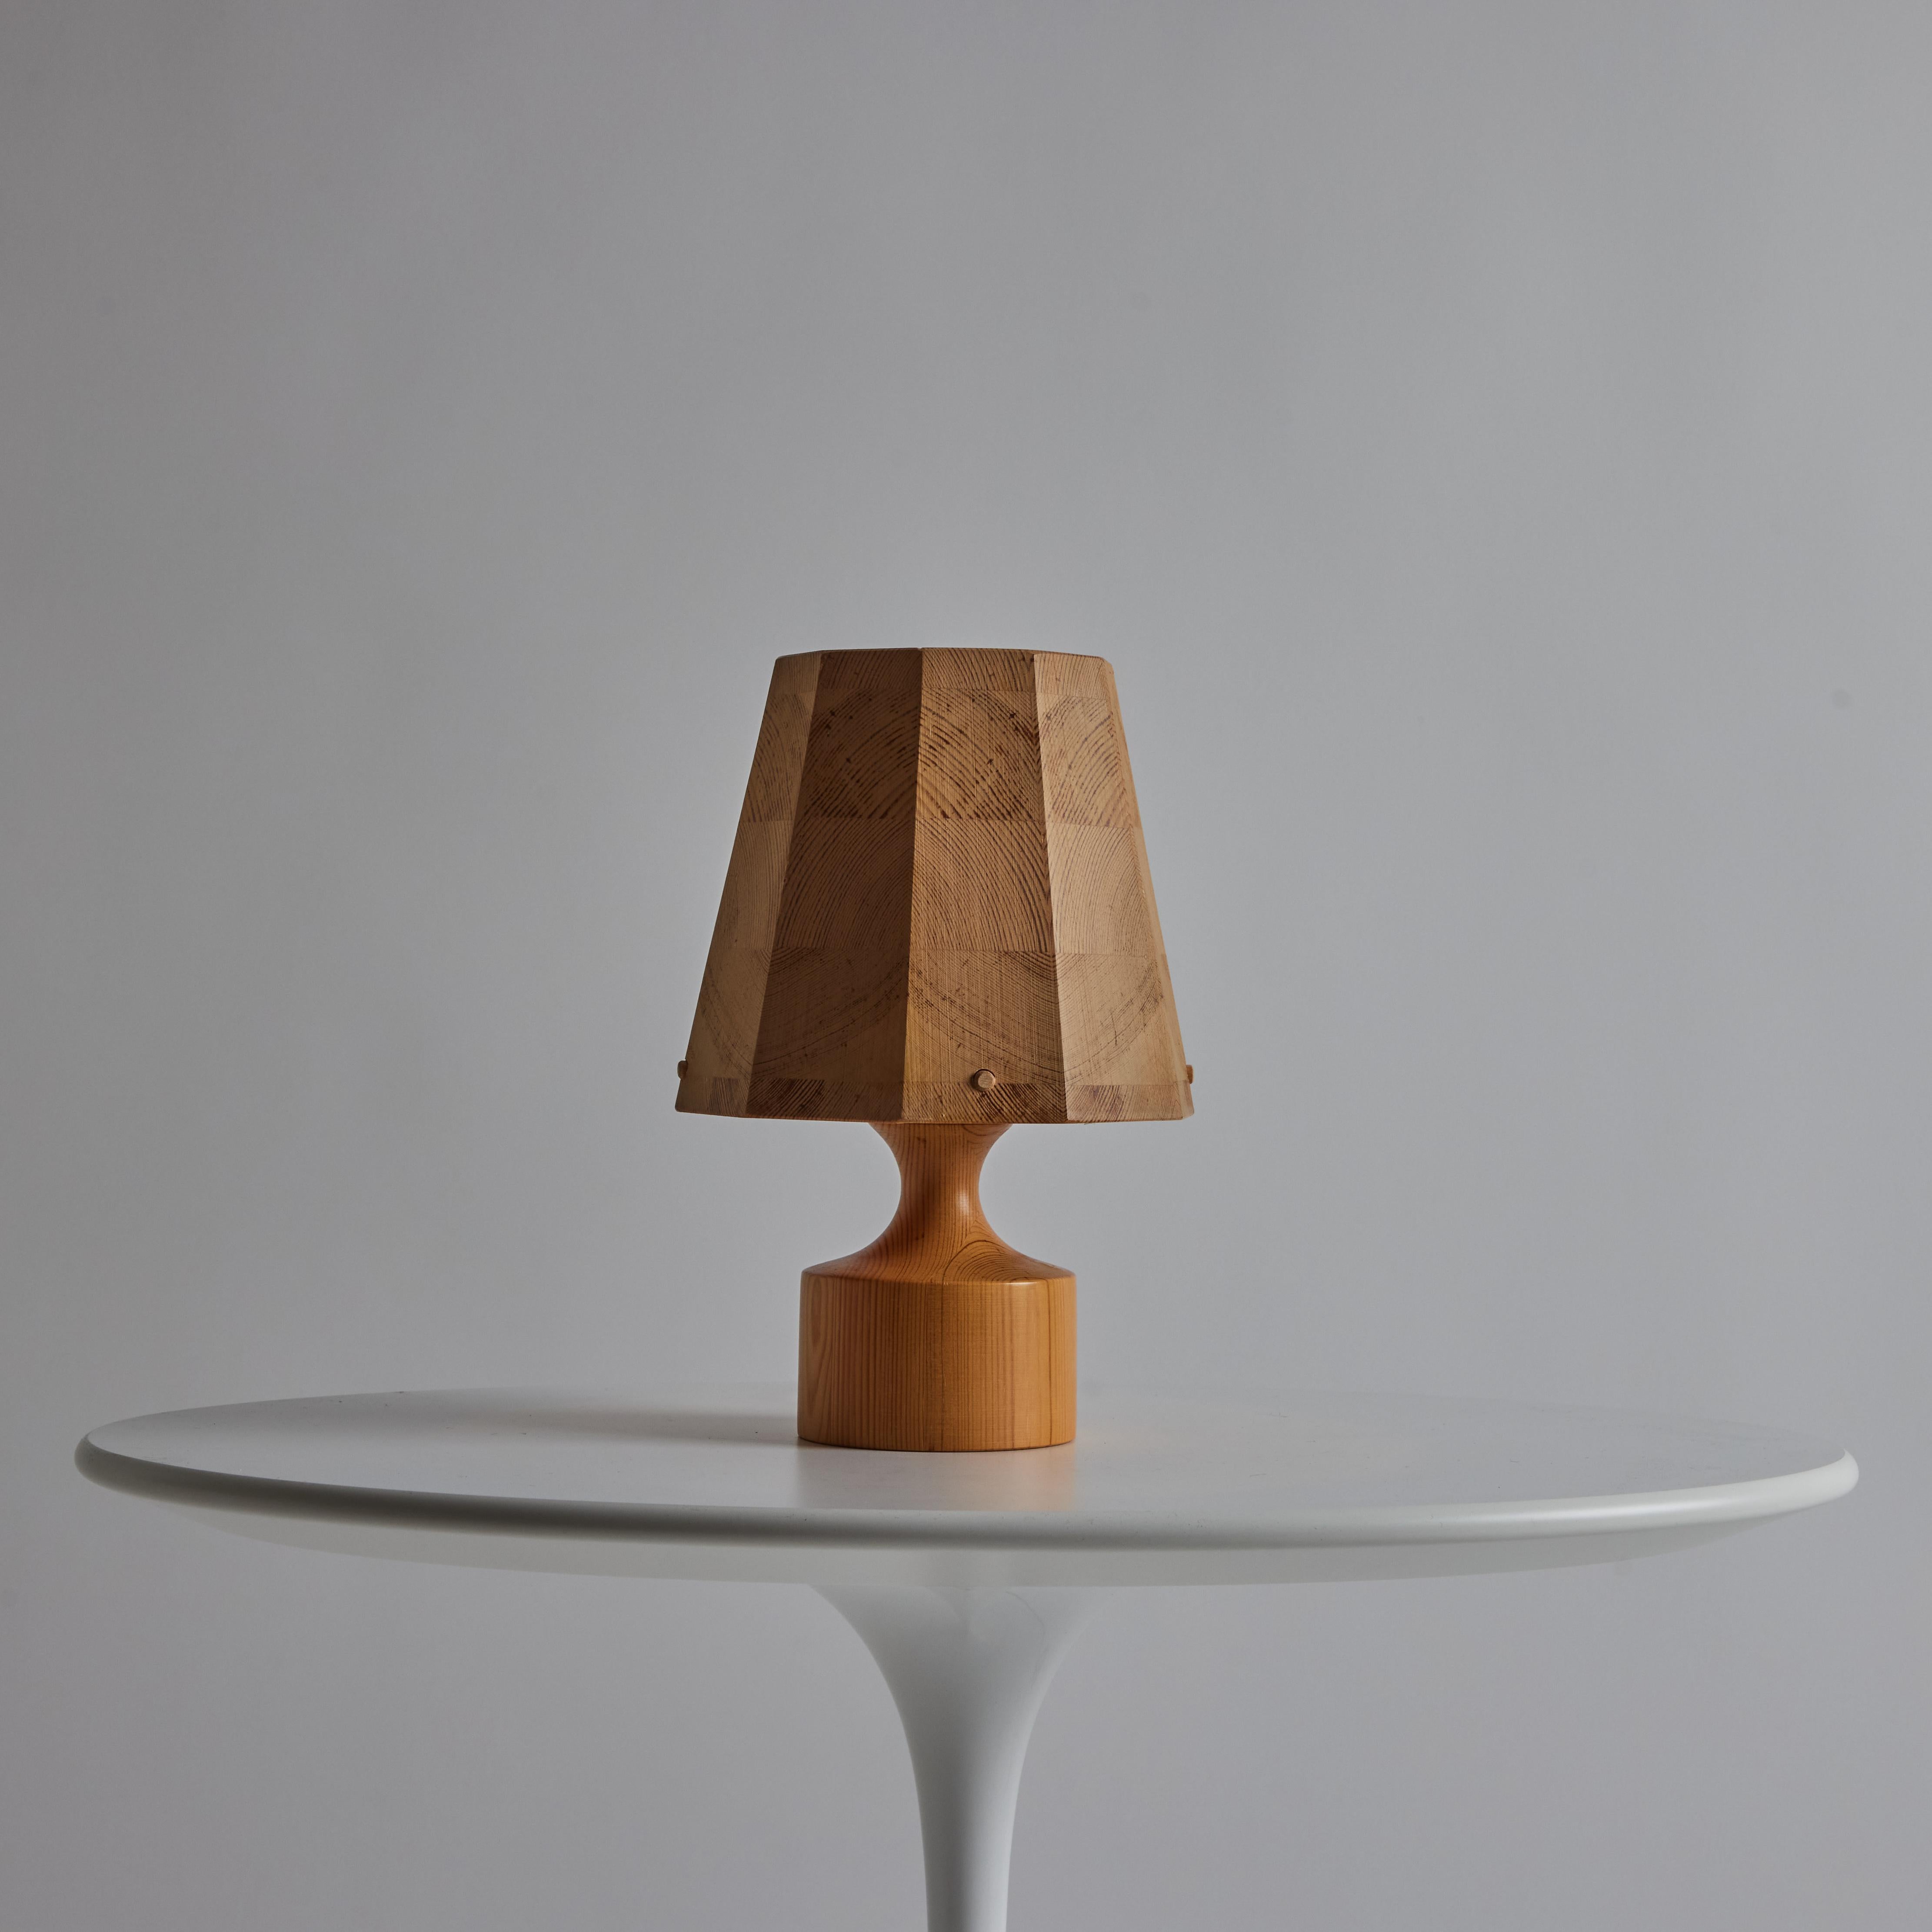 Mid-20th Century Pair of 1960s Wood Table Lamps Attributed to Hans-Agne Jakobsson for AB Ellysett For Sale